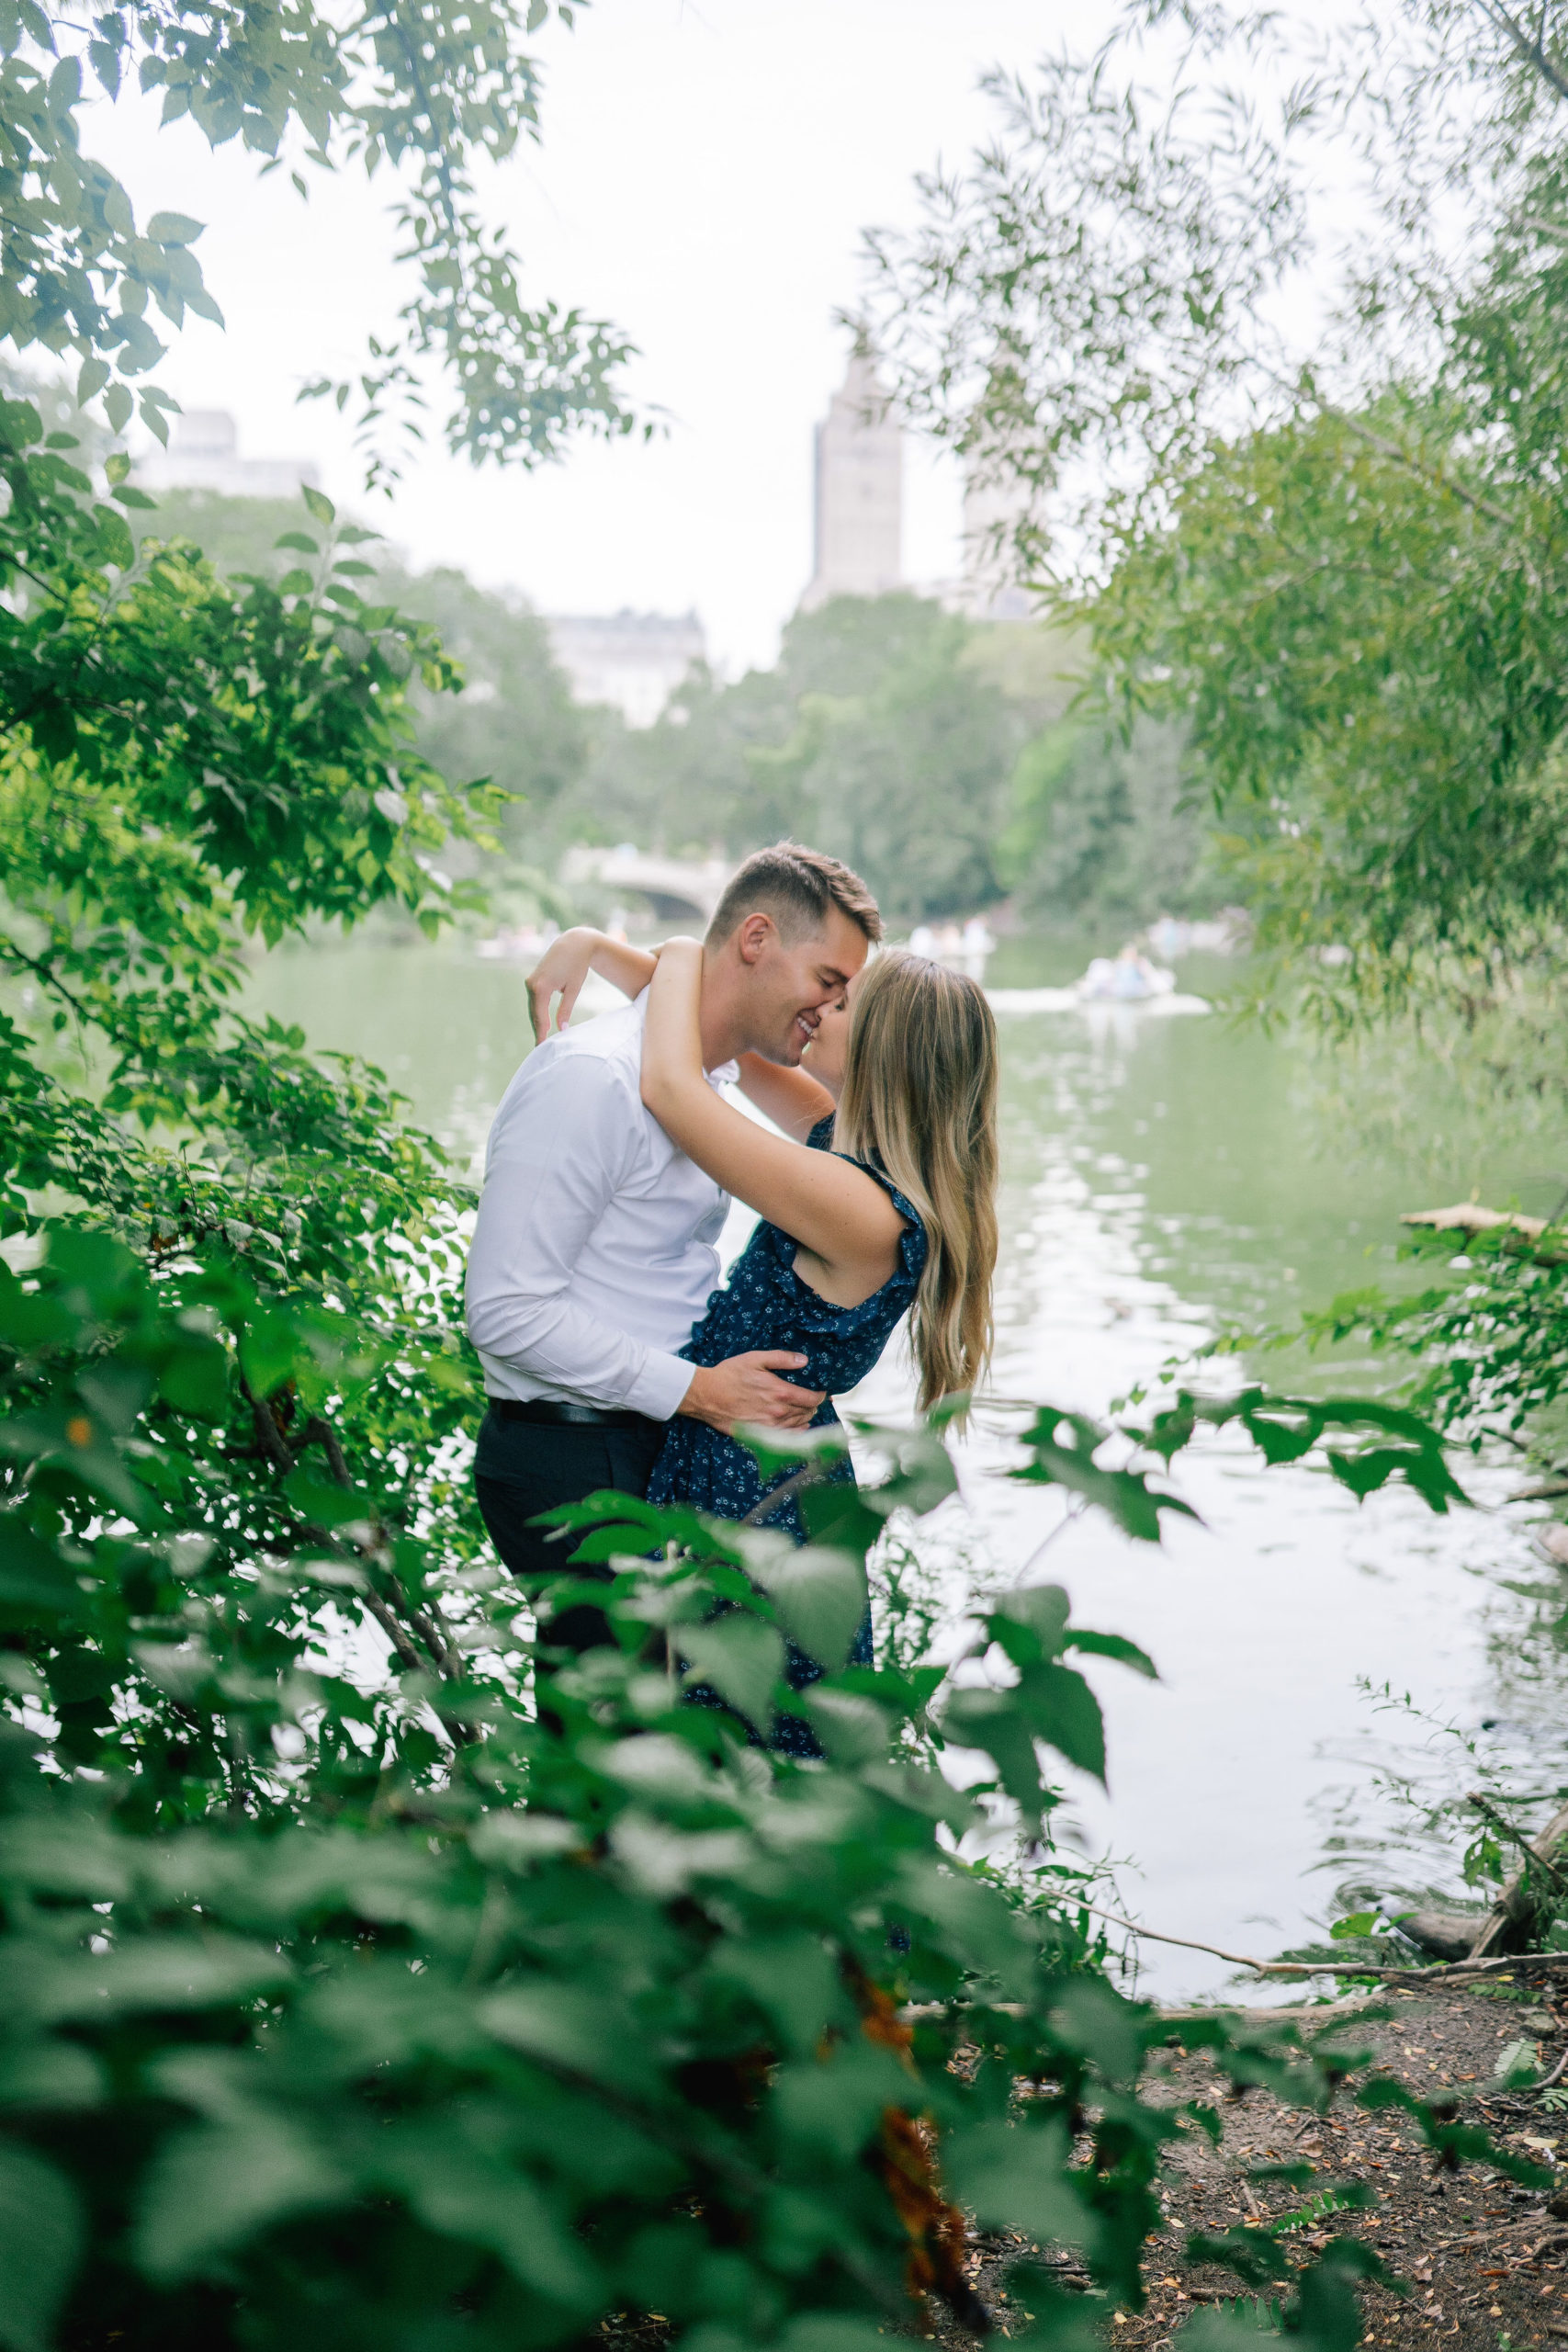 true loves kiss in the bushes in Central Park with a pond and the city in the back ground during an engagement photoshoot with best Manhattan wedding photographer